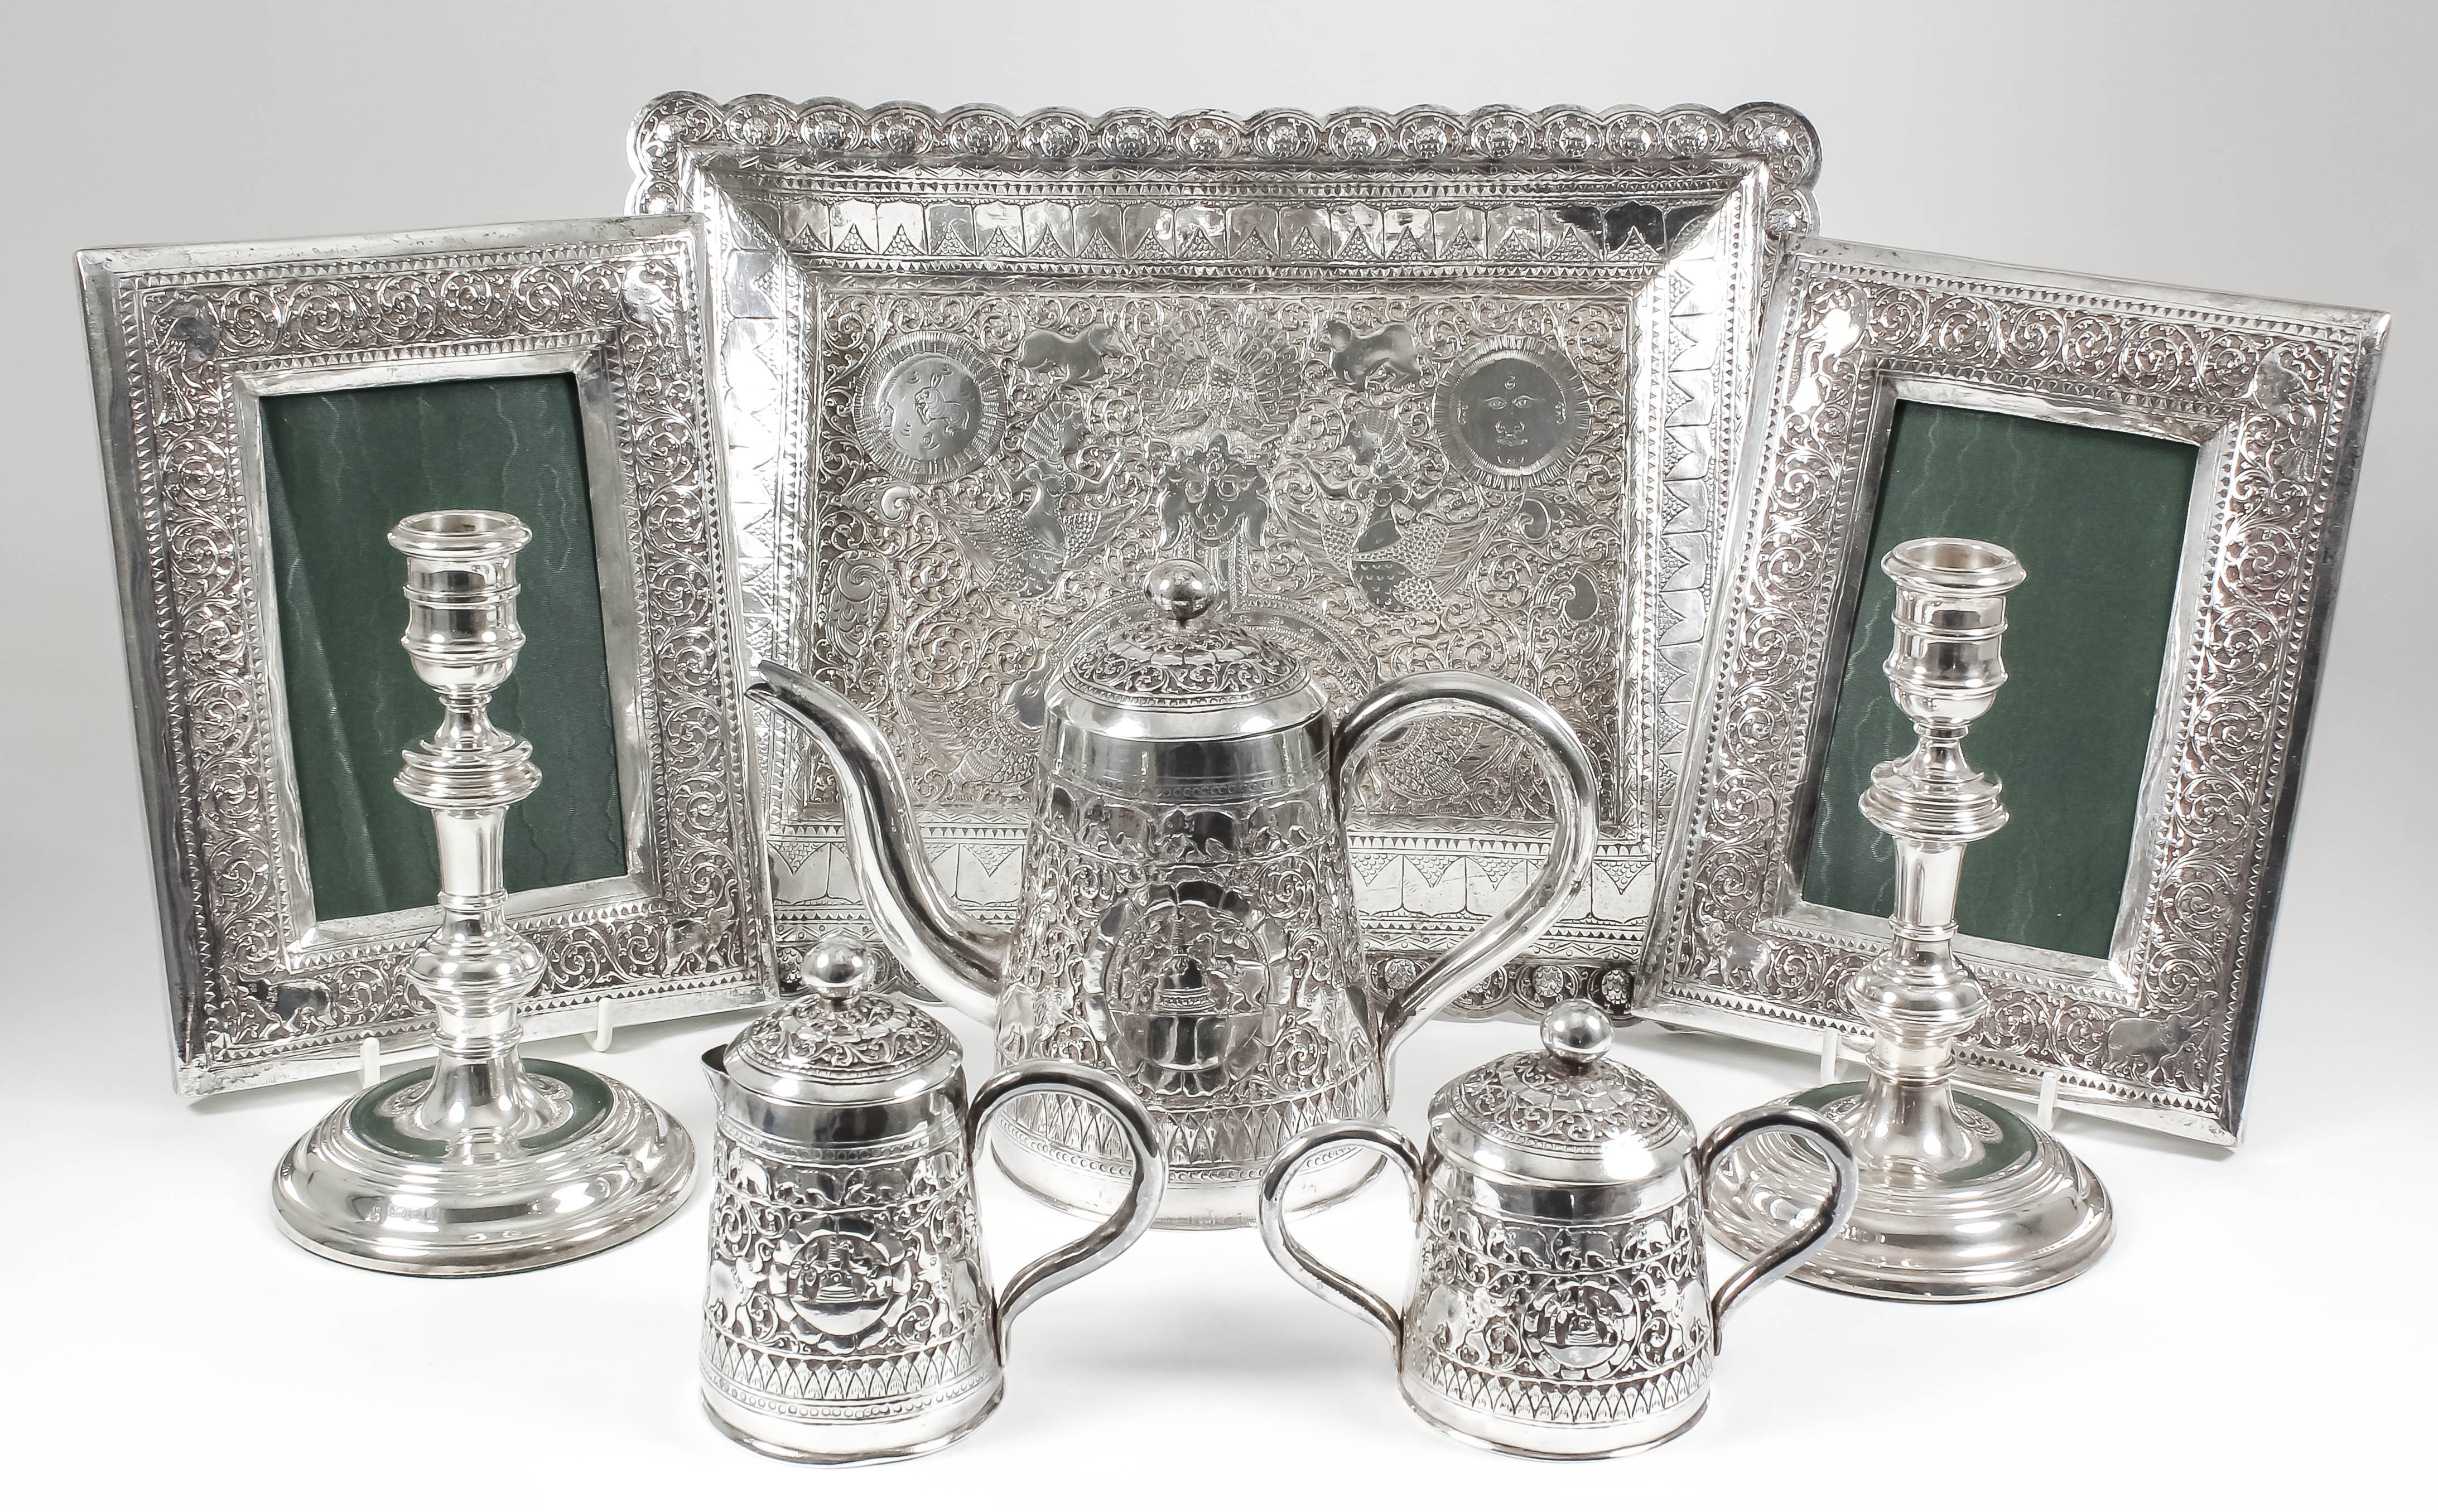 A pair of Elizabeth II silver pillar candlesticks with knopped stems, on circular moulded bases, 6.